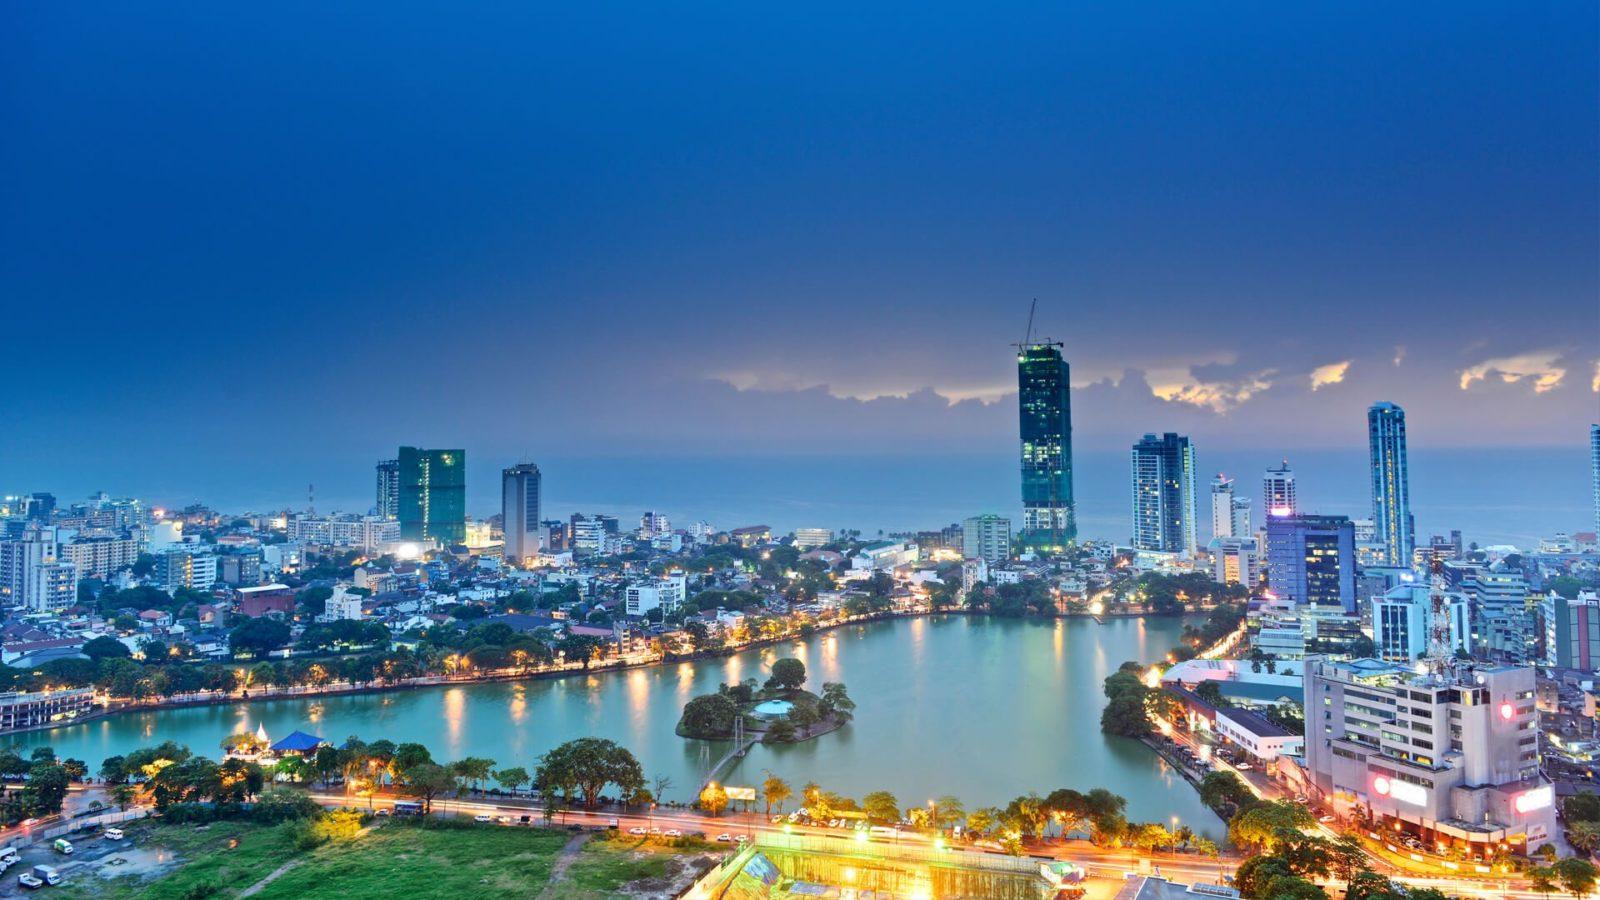 Colombo Sri Lanka December 05 2018 View Of The Colombo City Skyline With  Modern Architecture Buildings Including The Lotus Towers Stock Photo   Download Image Now  iStock